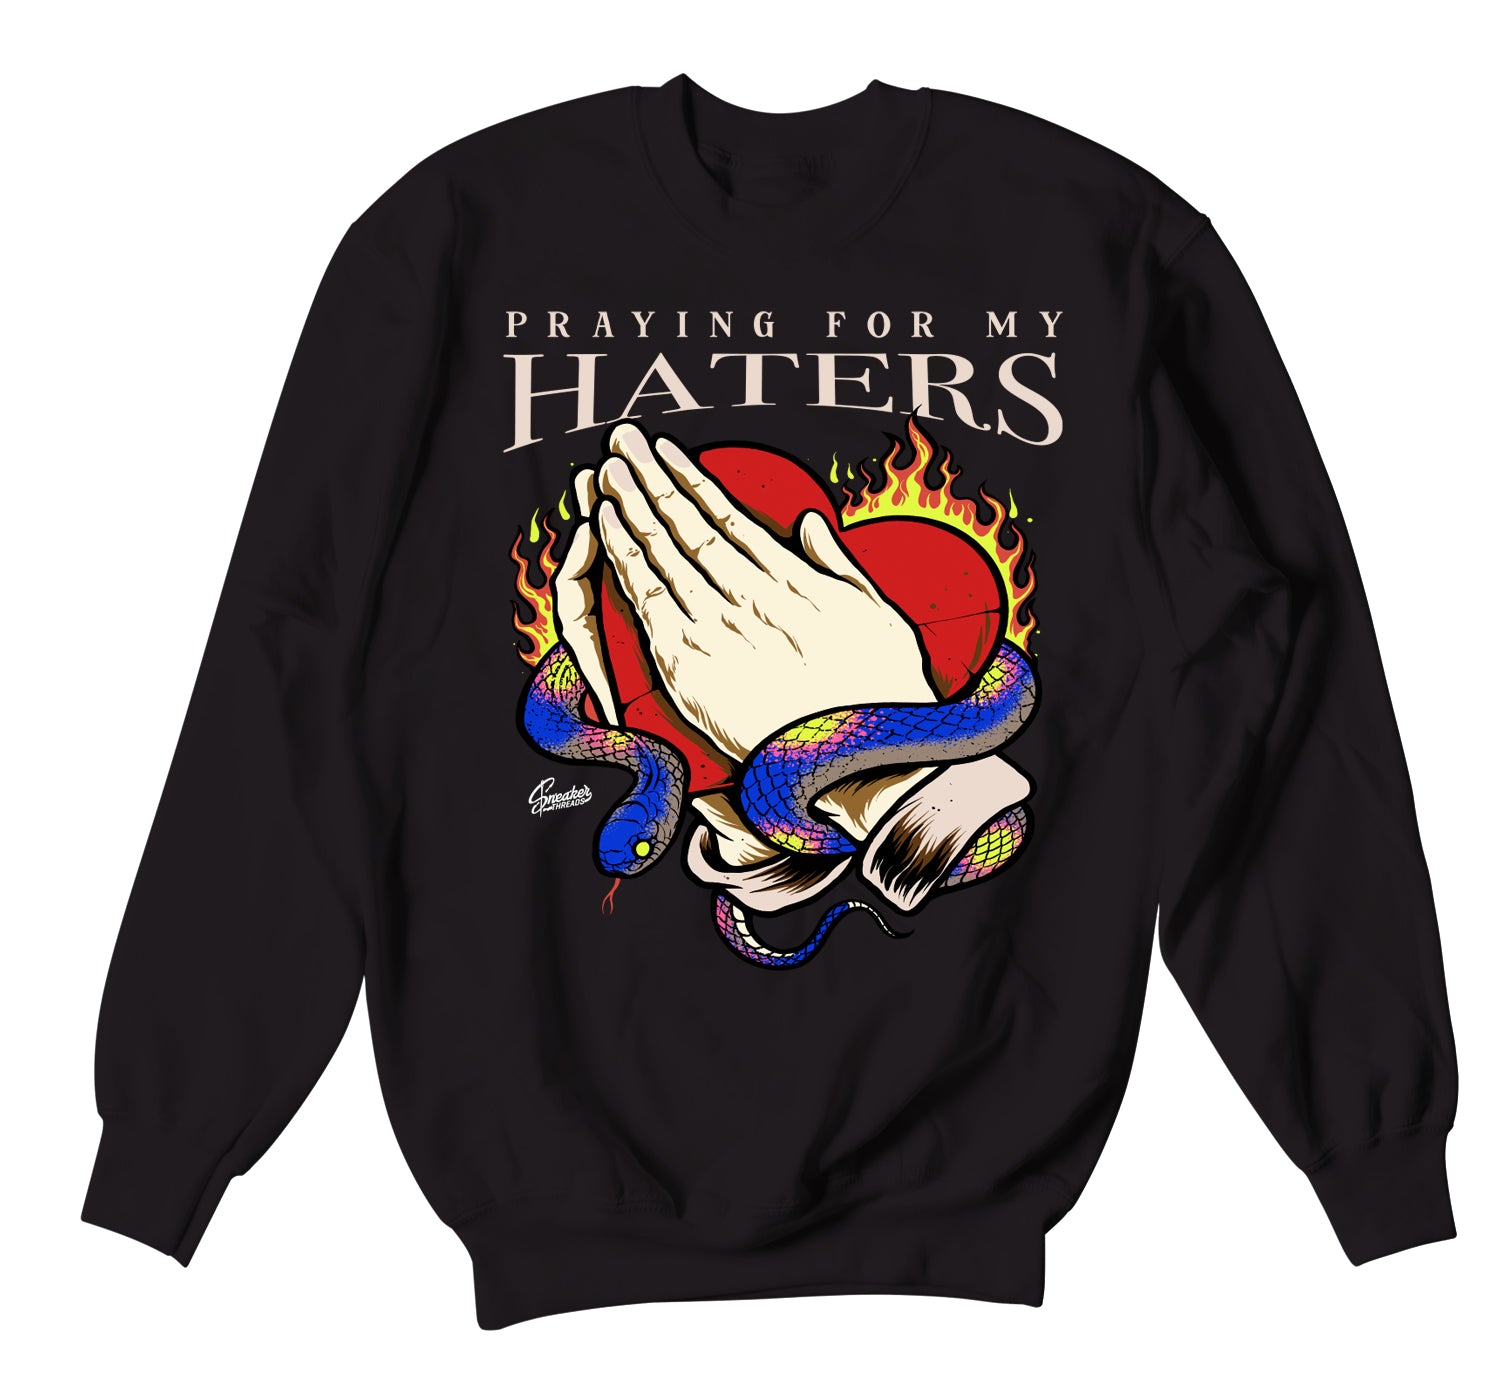 Retro 4 Wild Things Sweater - Praying For Haters - Black